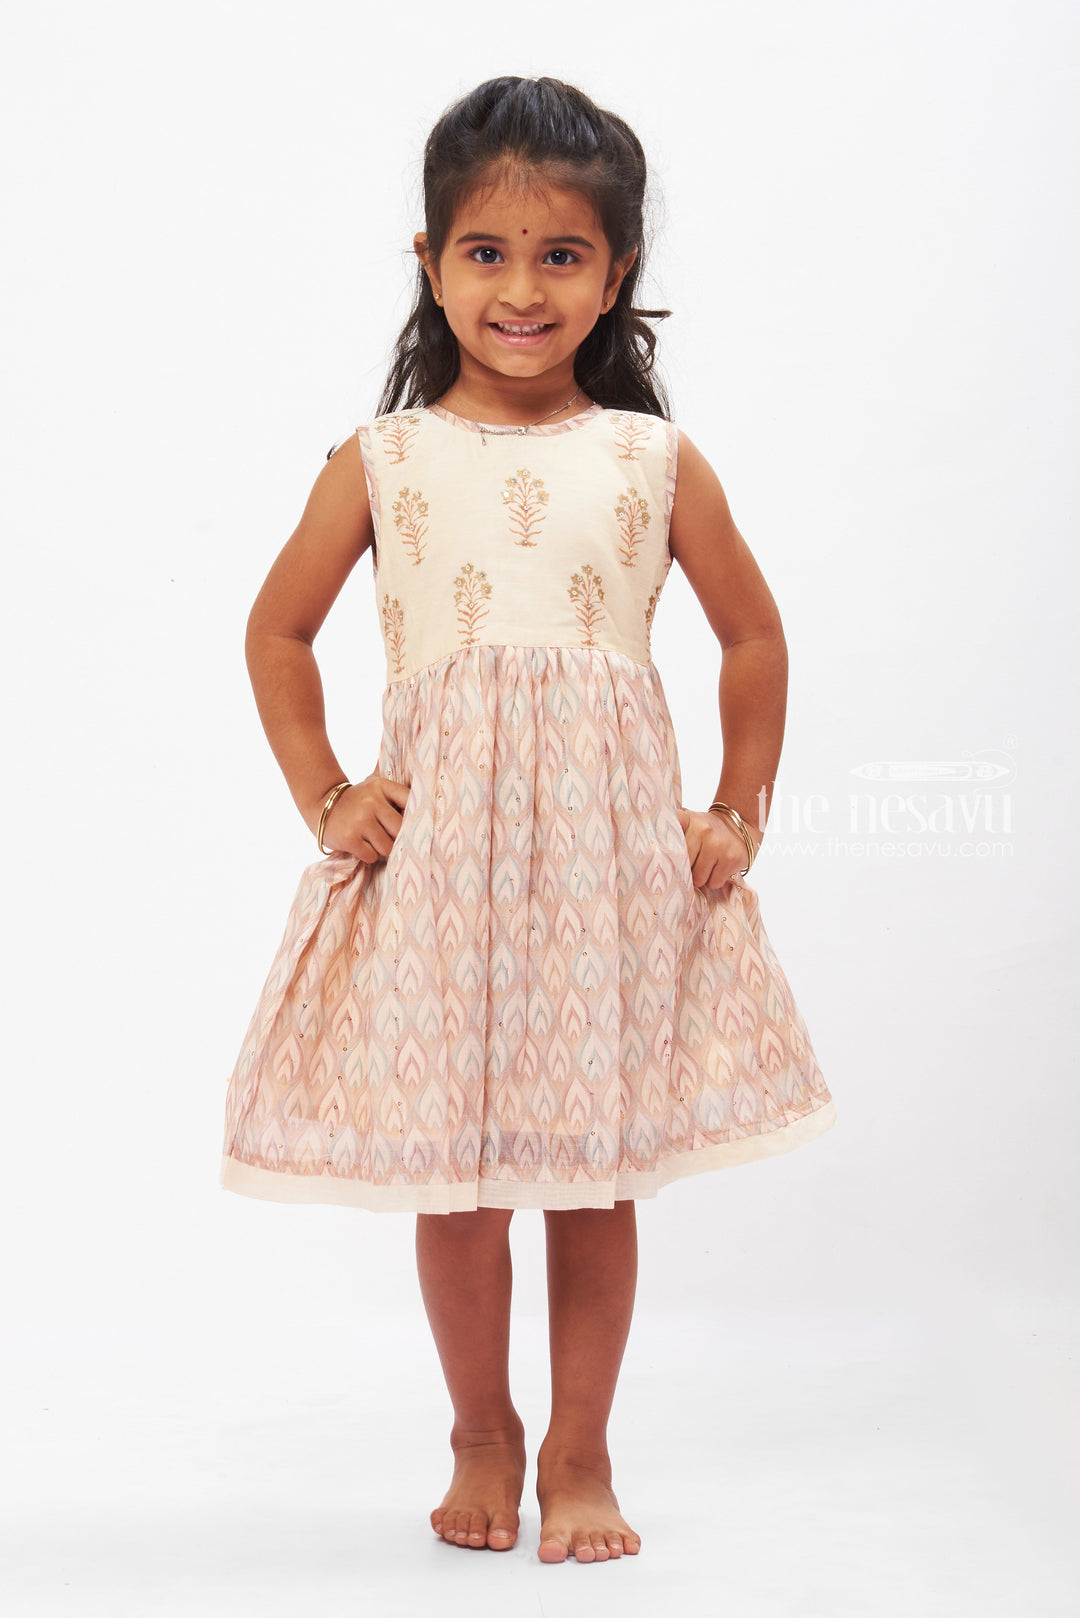 The Nesavu Girls Cotton Frock Soft Cotton Leaf-Print Frock with Delicate Accents for Girls Nesavu 12 (3M) / Half white GFC1231A-12 Girls Summer Cotton Dress Essentials | Neutral Leaf-Print Frock | The Nesavu